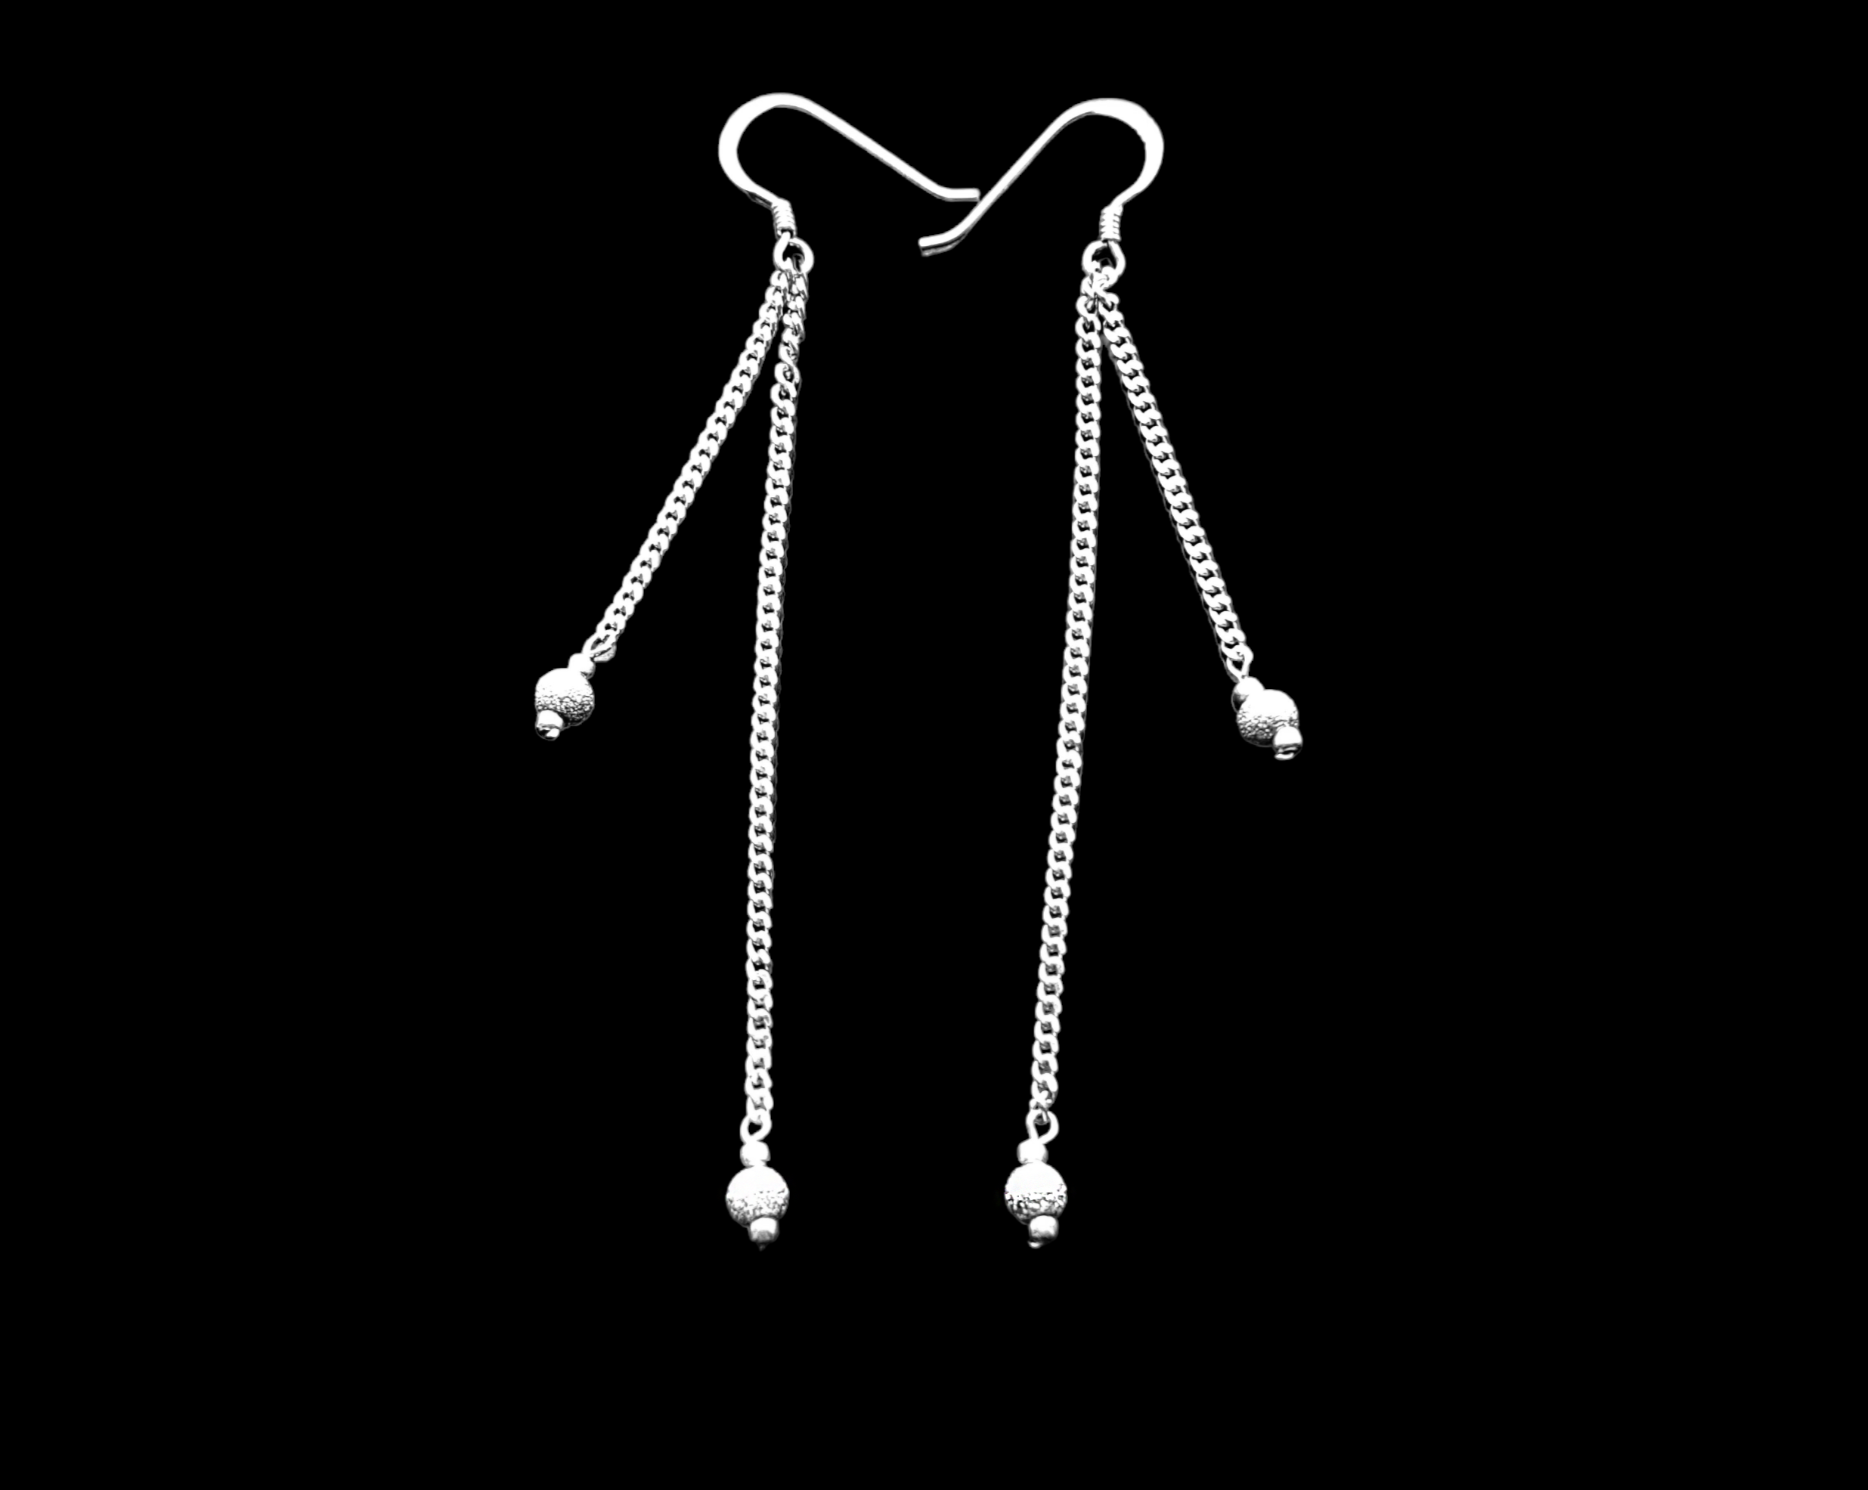 Extra Long Dangle Chain Earrings, Two long Sterling Silver chains with little sparkly balls on the base of each chain. Earrings dangle on french style earring hooks. Displayed on black background